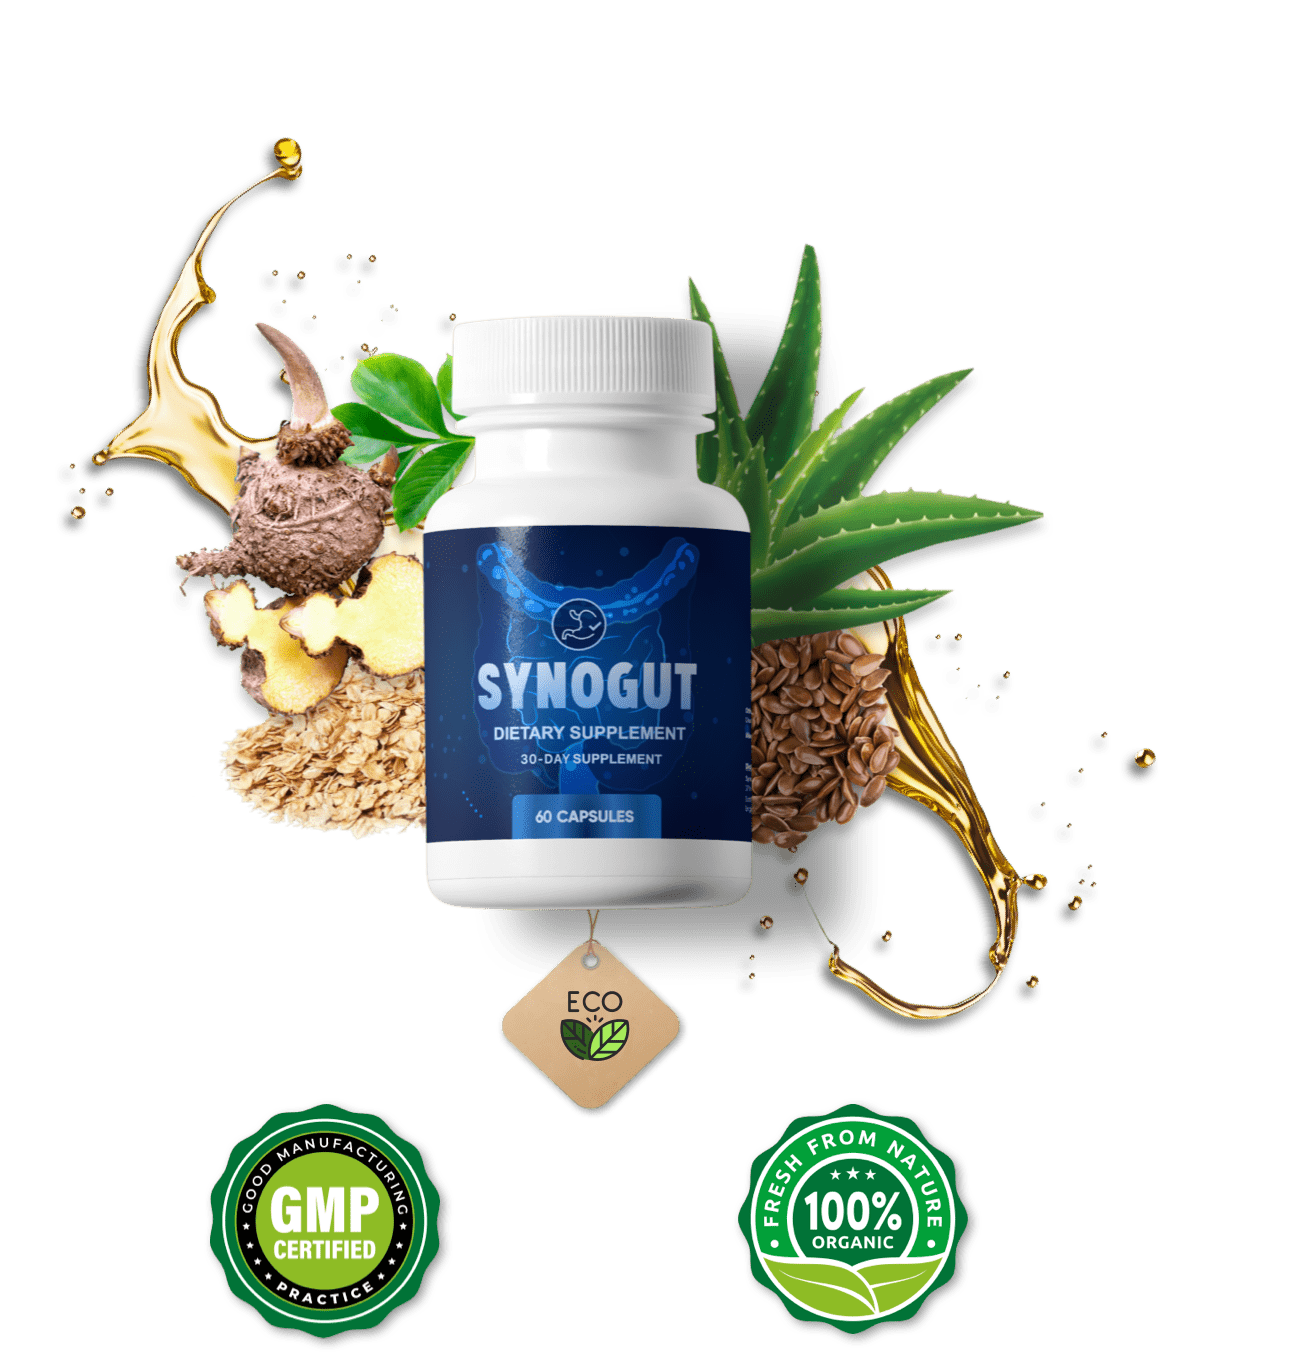 Synogut dietary supplement